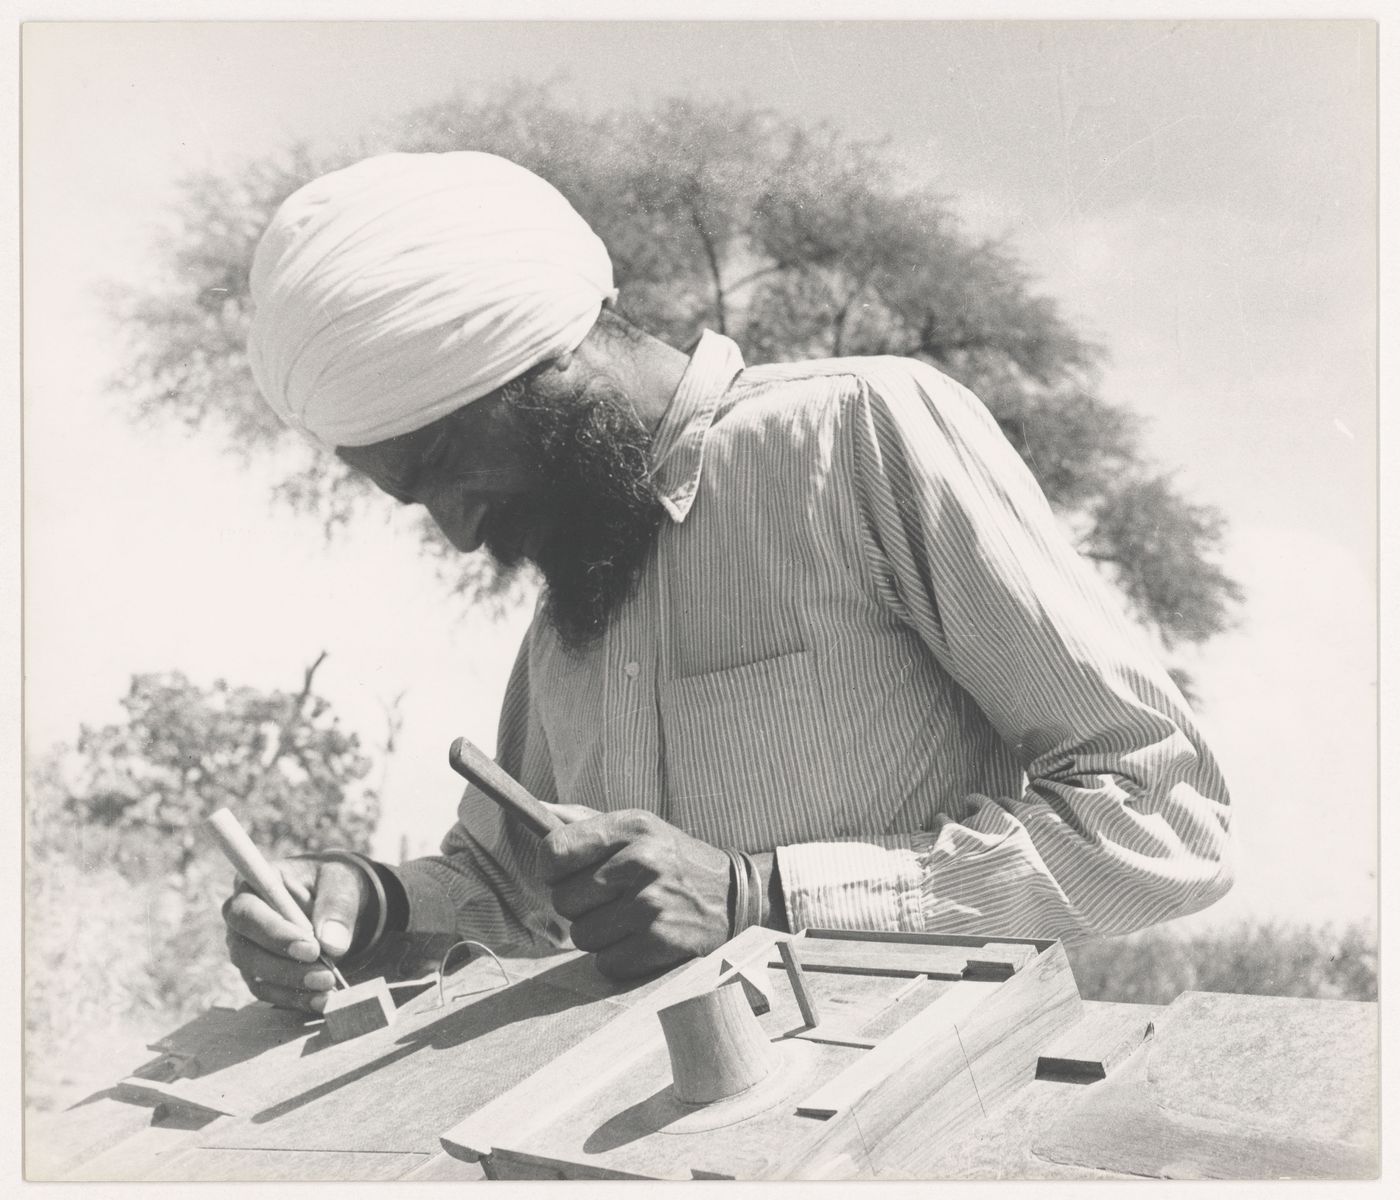 Portrait of the model maker, Rattan Singh, at work on the model for Capitol Complex, Sector 1, Chandigarh, India